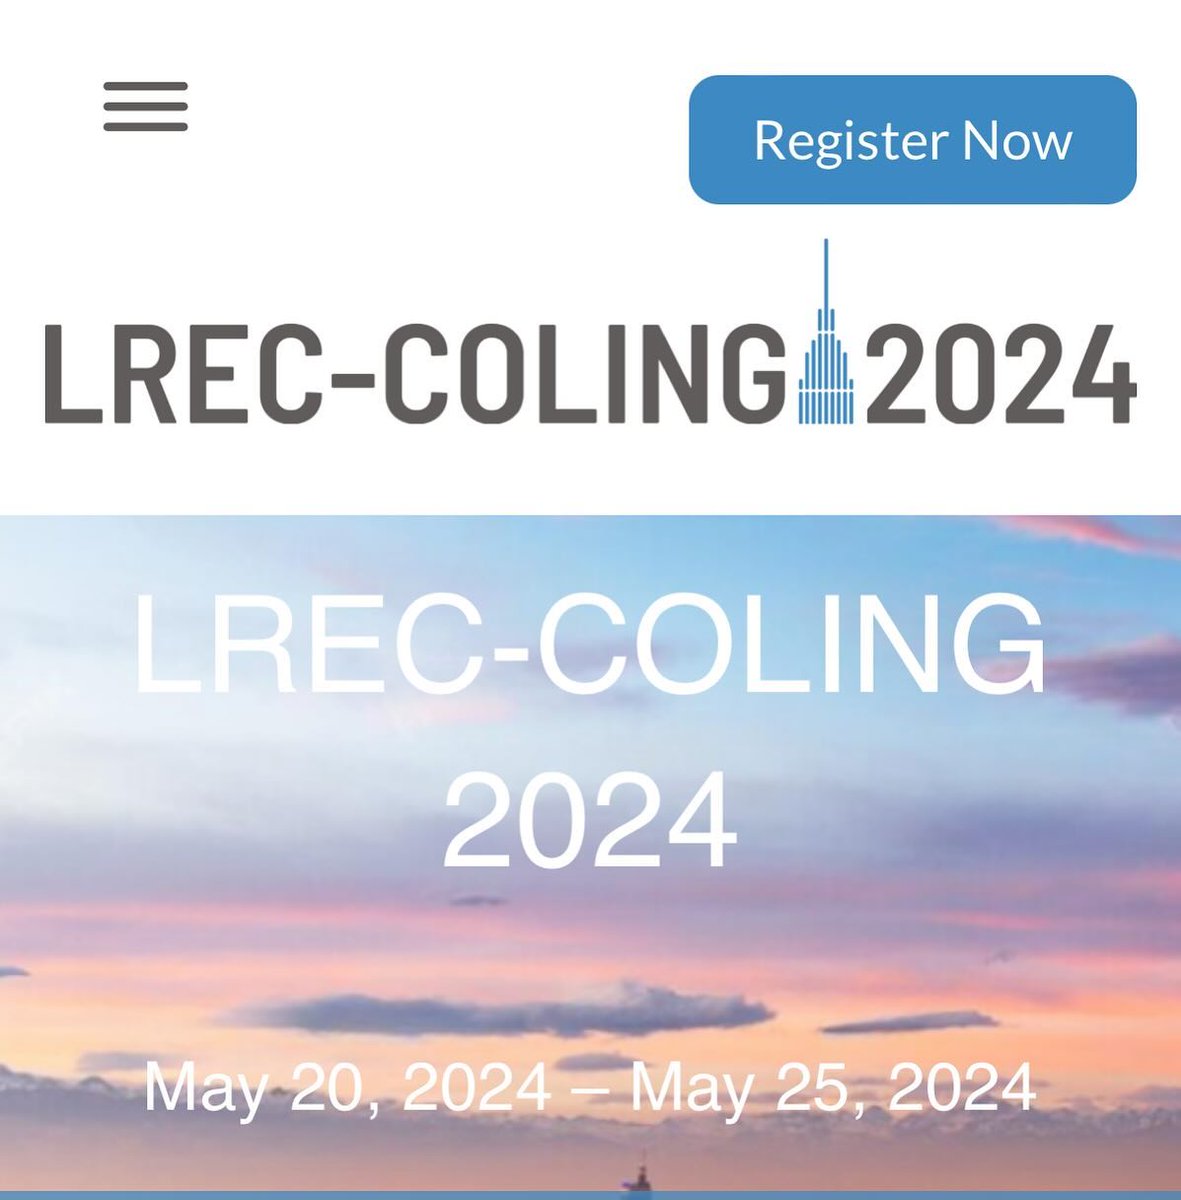 Time’s ticking! ⏰ Early registration for LREC-COLING 2024 ends April 15th! Don’t wait, secure your spot now! lrec-coling-2024.org/registration/ #NLProc @knmnyn @NicolettaCZ @AILC_NLP